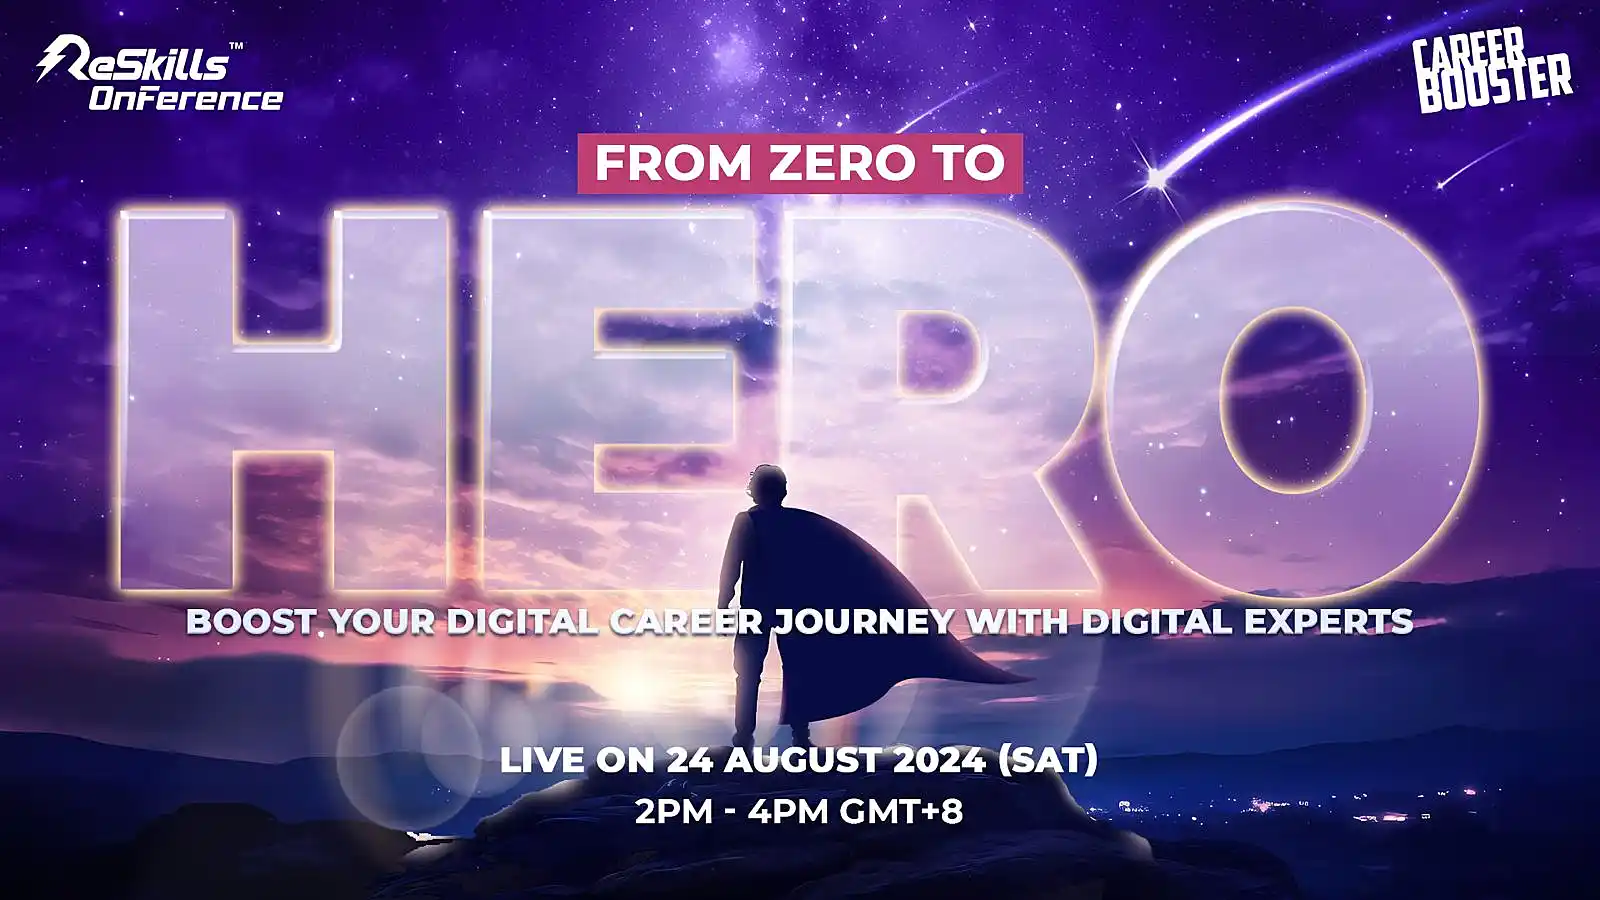 From Zero to Hero: Boost Your Digital Career Journey with Digital Experts - ReSkills